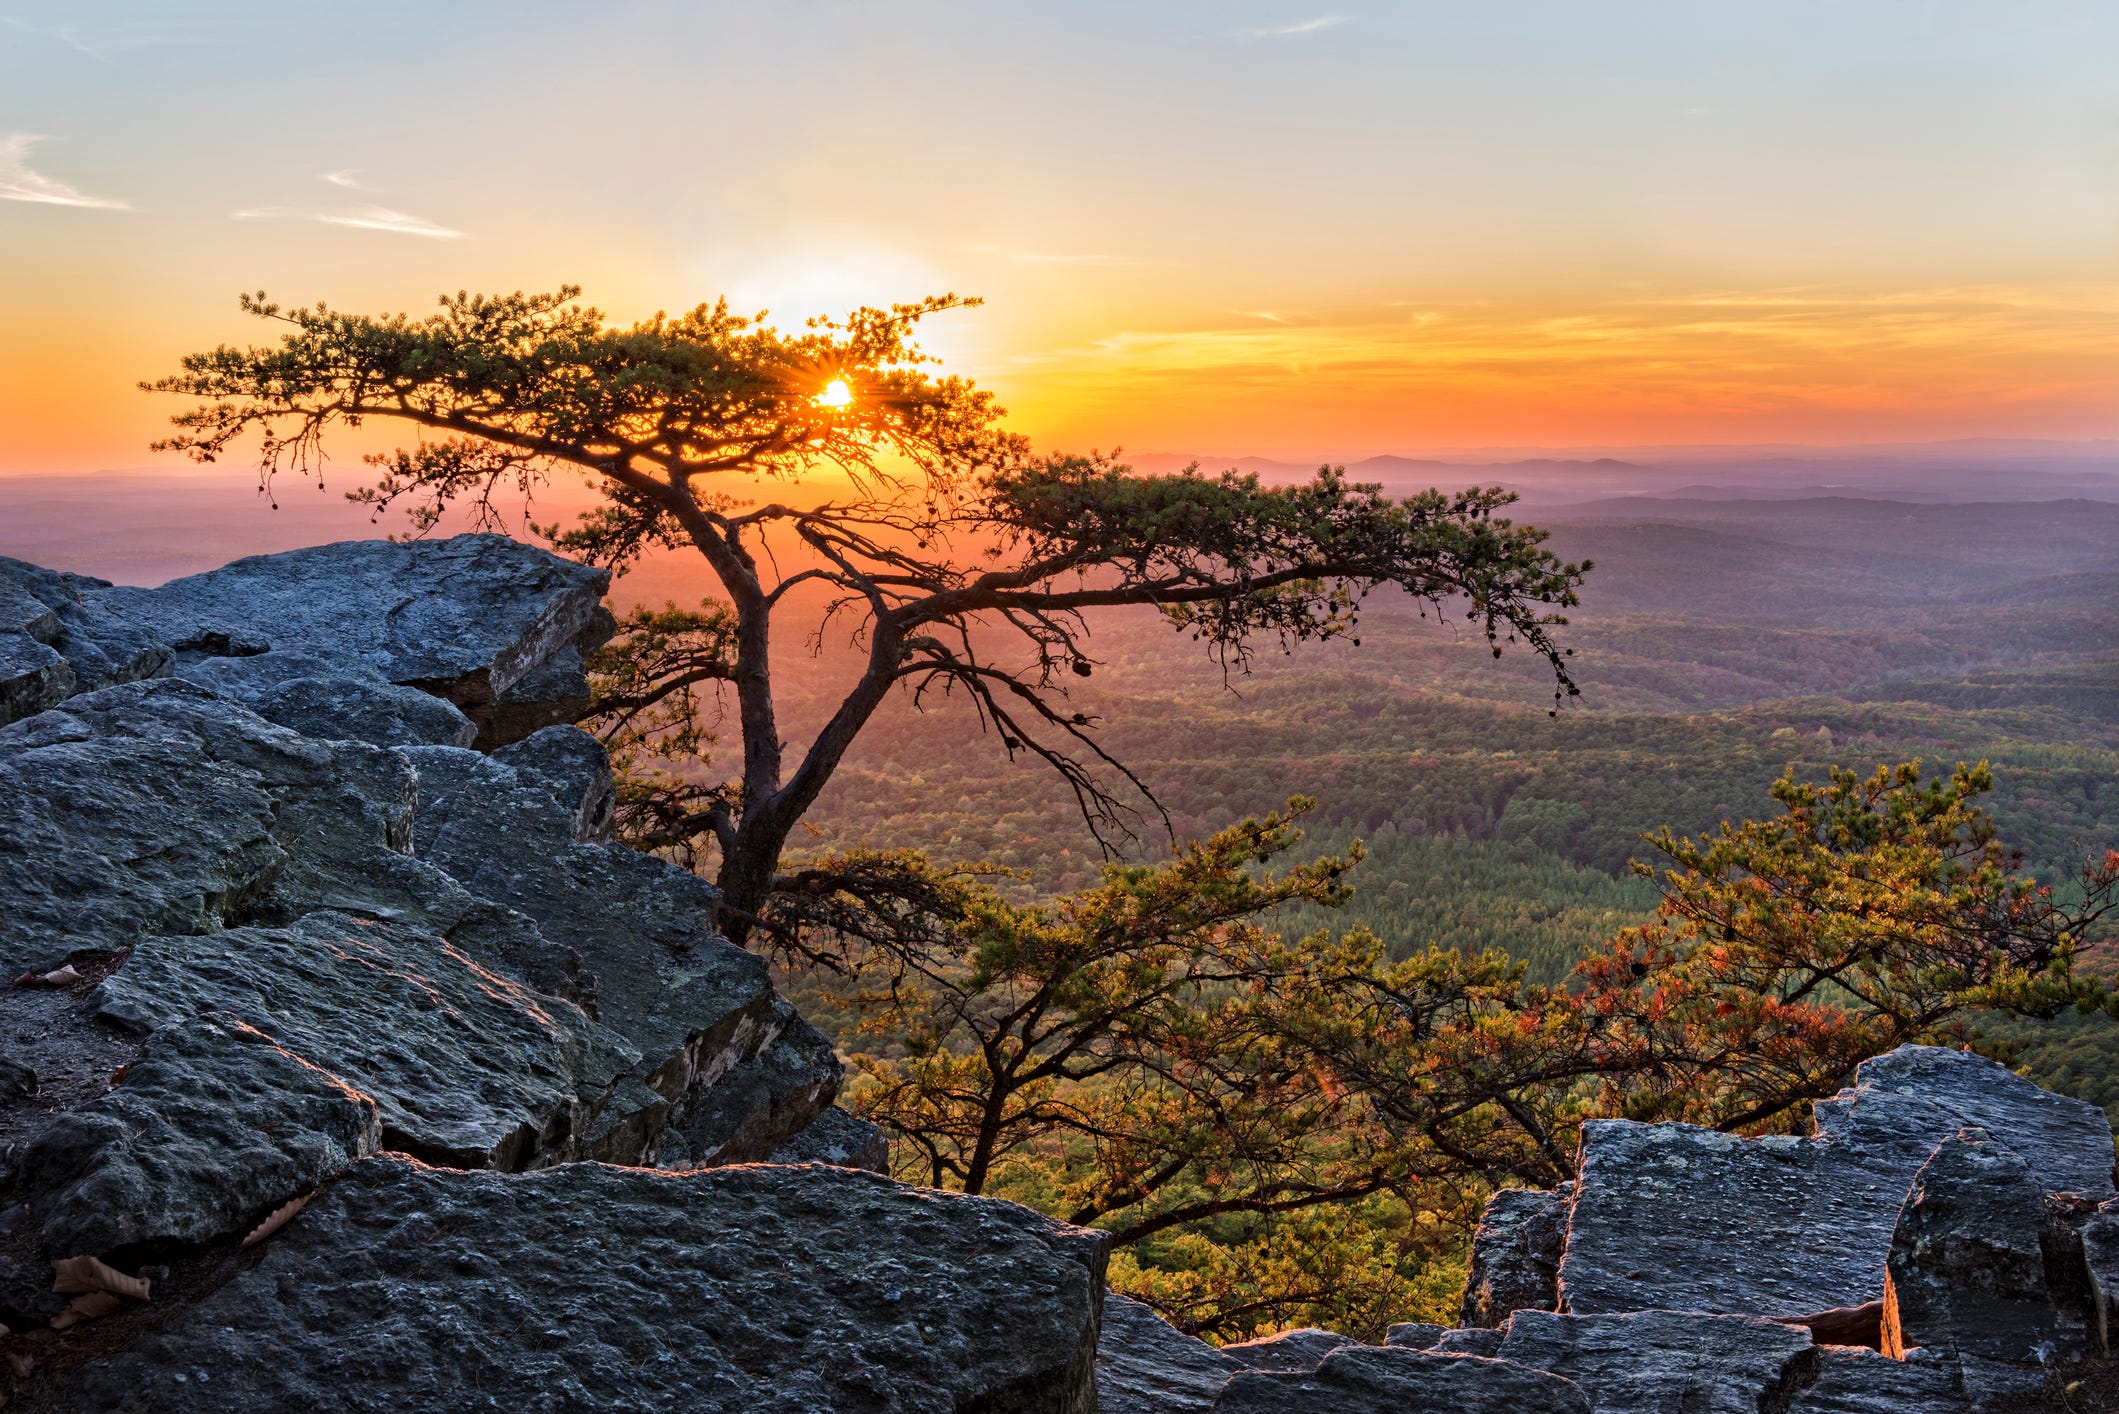 <p><a href="https://alabamanewscenter.com/2023/05/12/5-of-alabamas-most-beautiful-places/">Alabama News Center</a> named Cheaha Mountain State Park one of the top five most beautiful places in Alabama.</p>